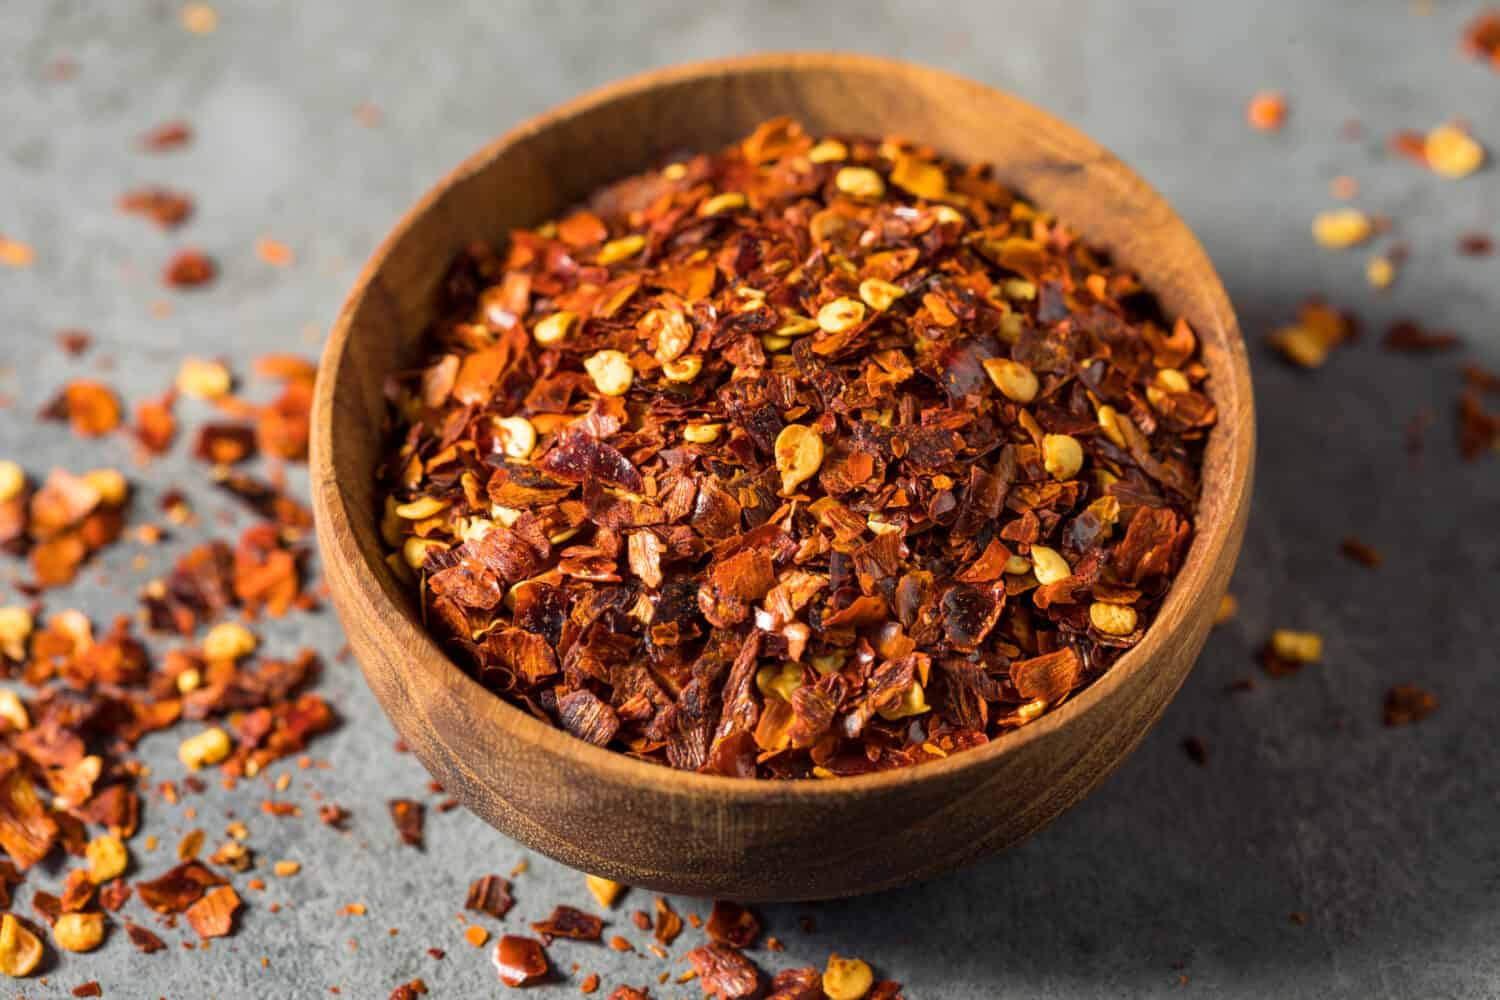 How To Make Your Own Red Pepper Flakes Using Fresh Peppers